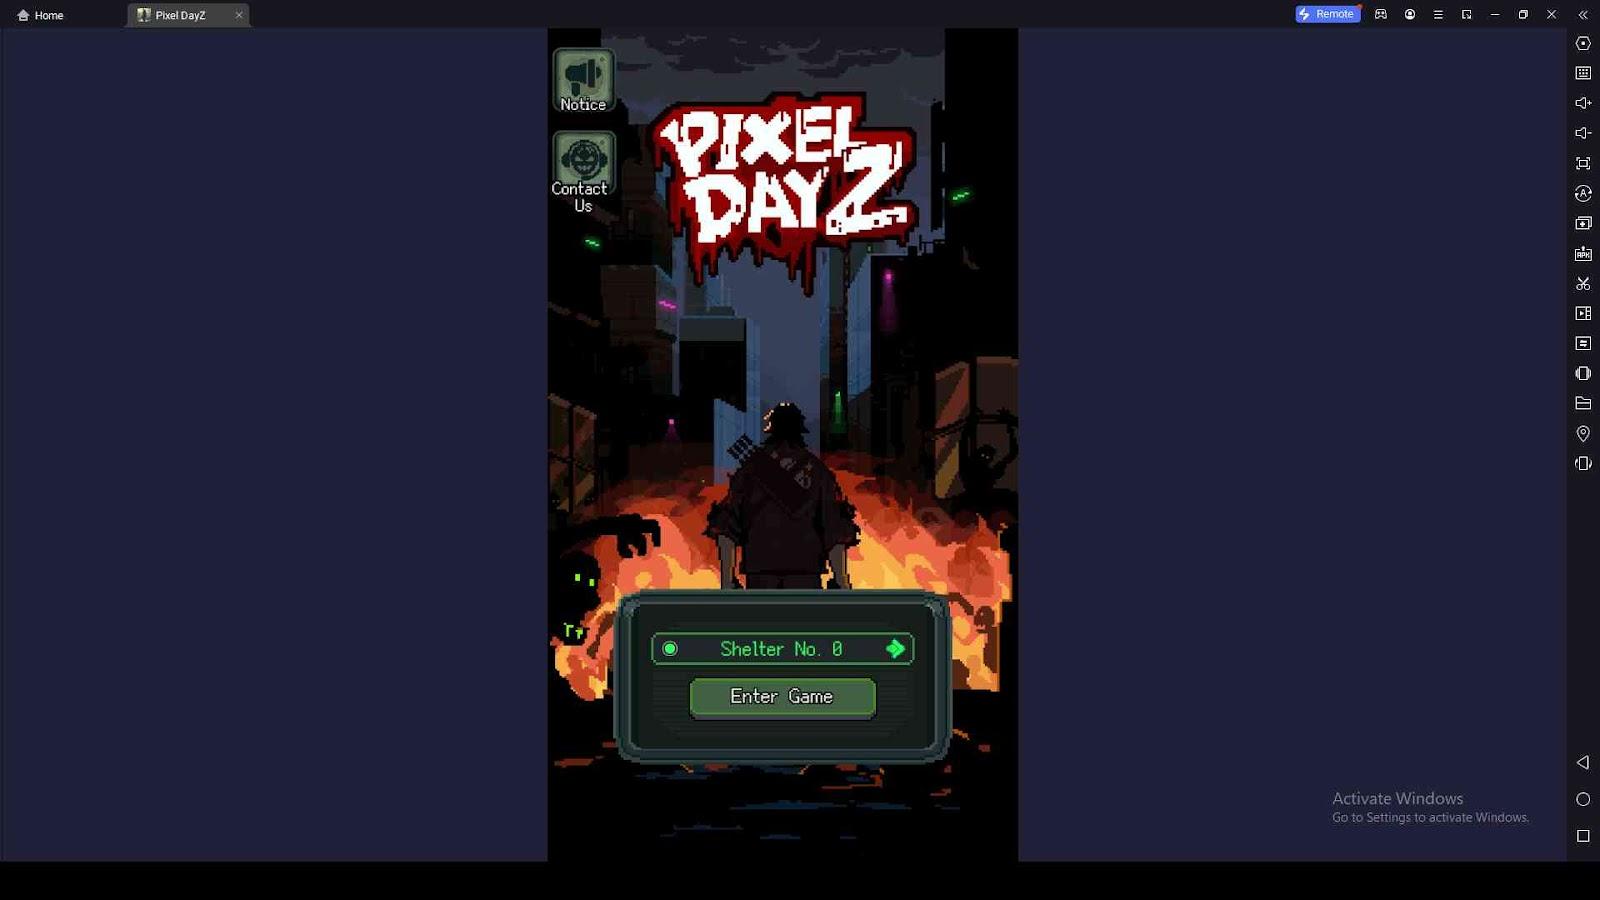 Pixel DayZ - idle RPG Guide and Tips